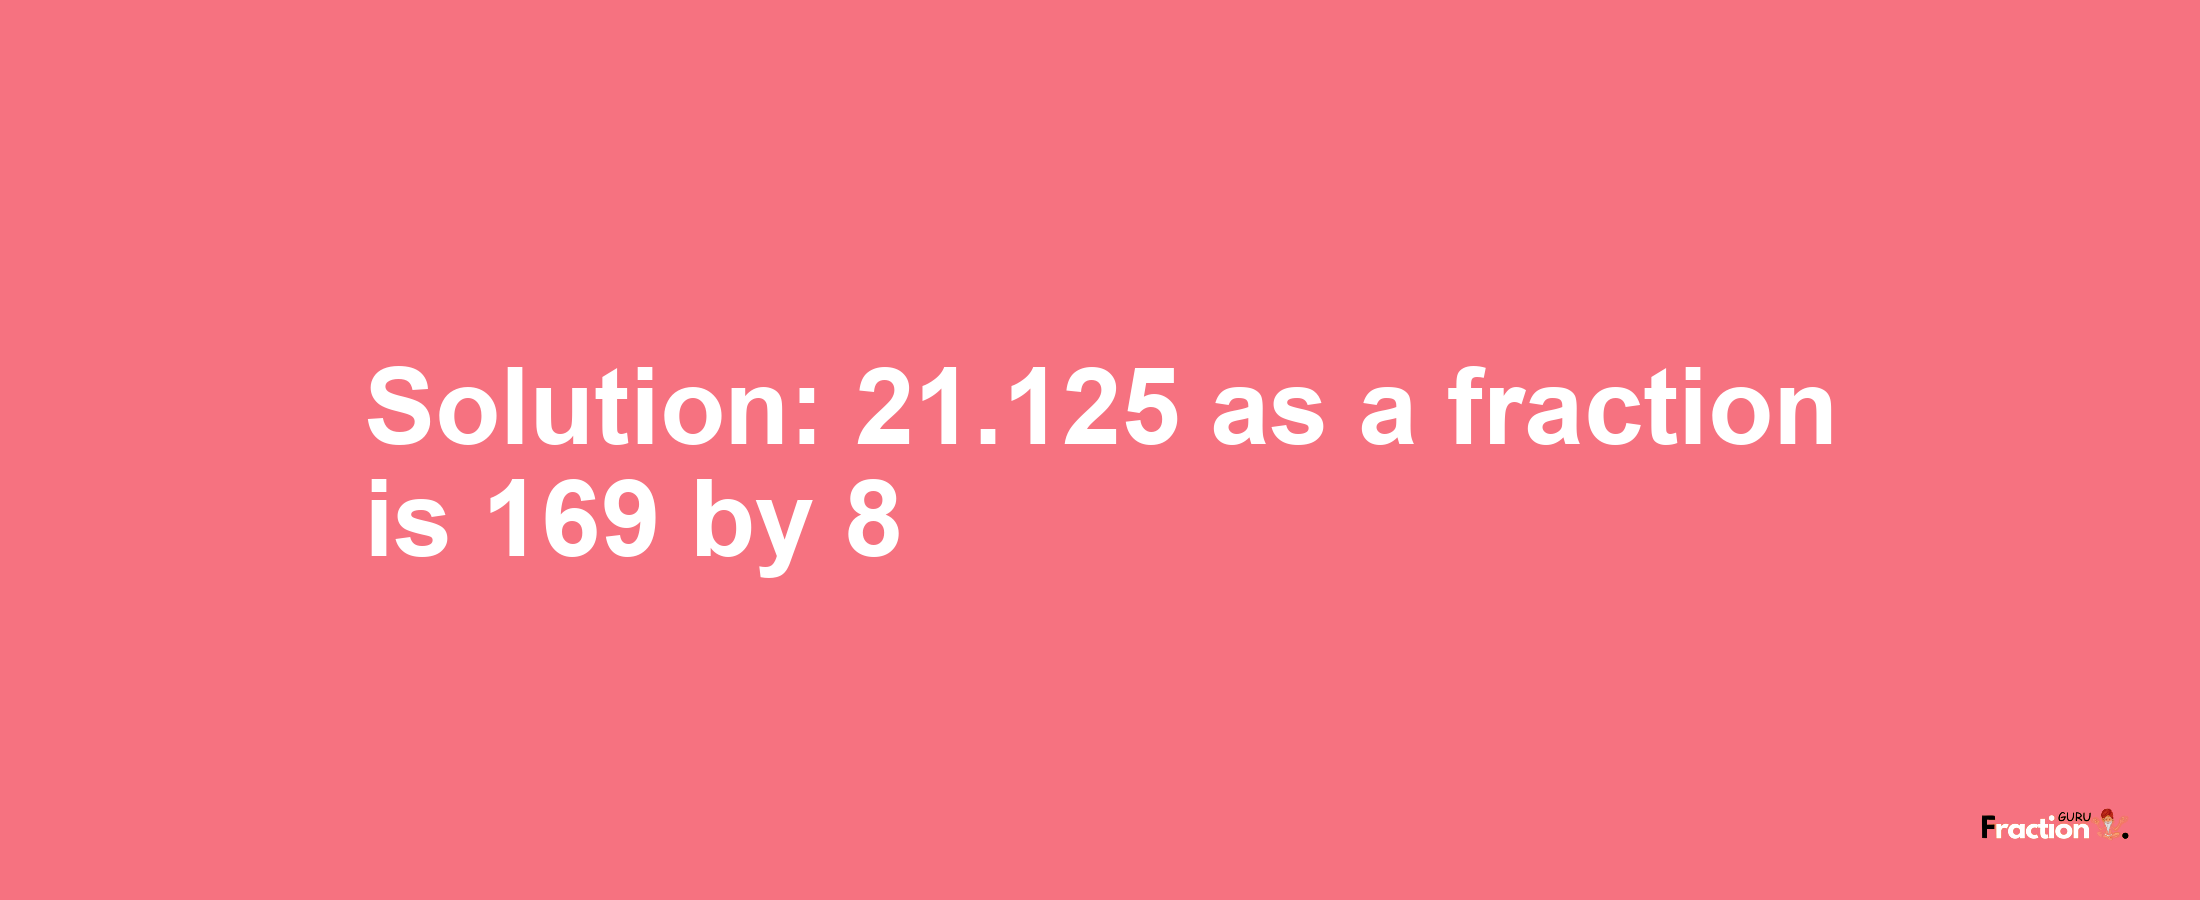 Solution:21.125 as a fraction is 169/8